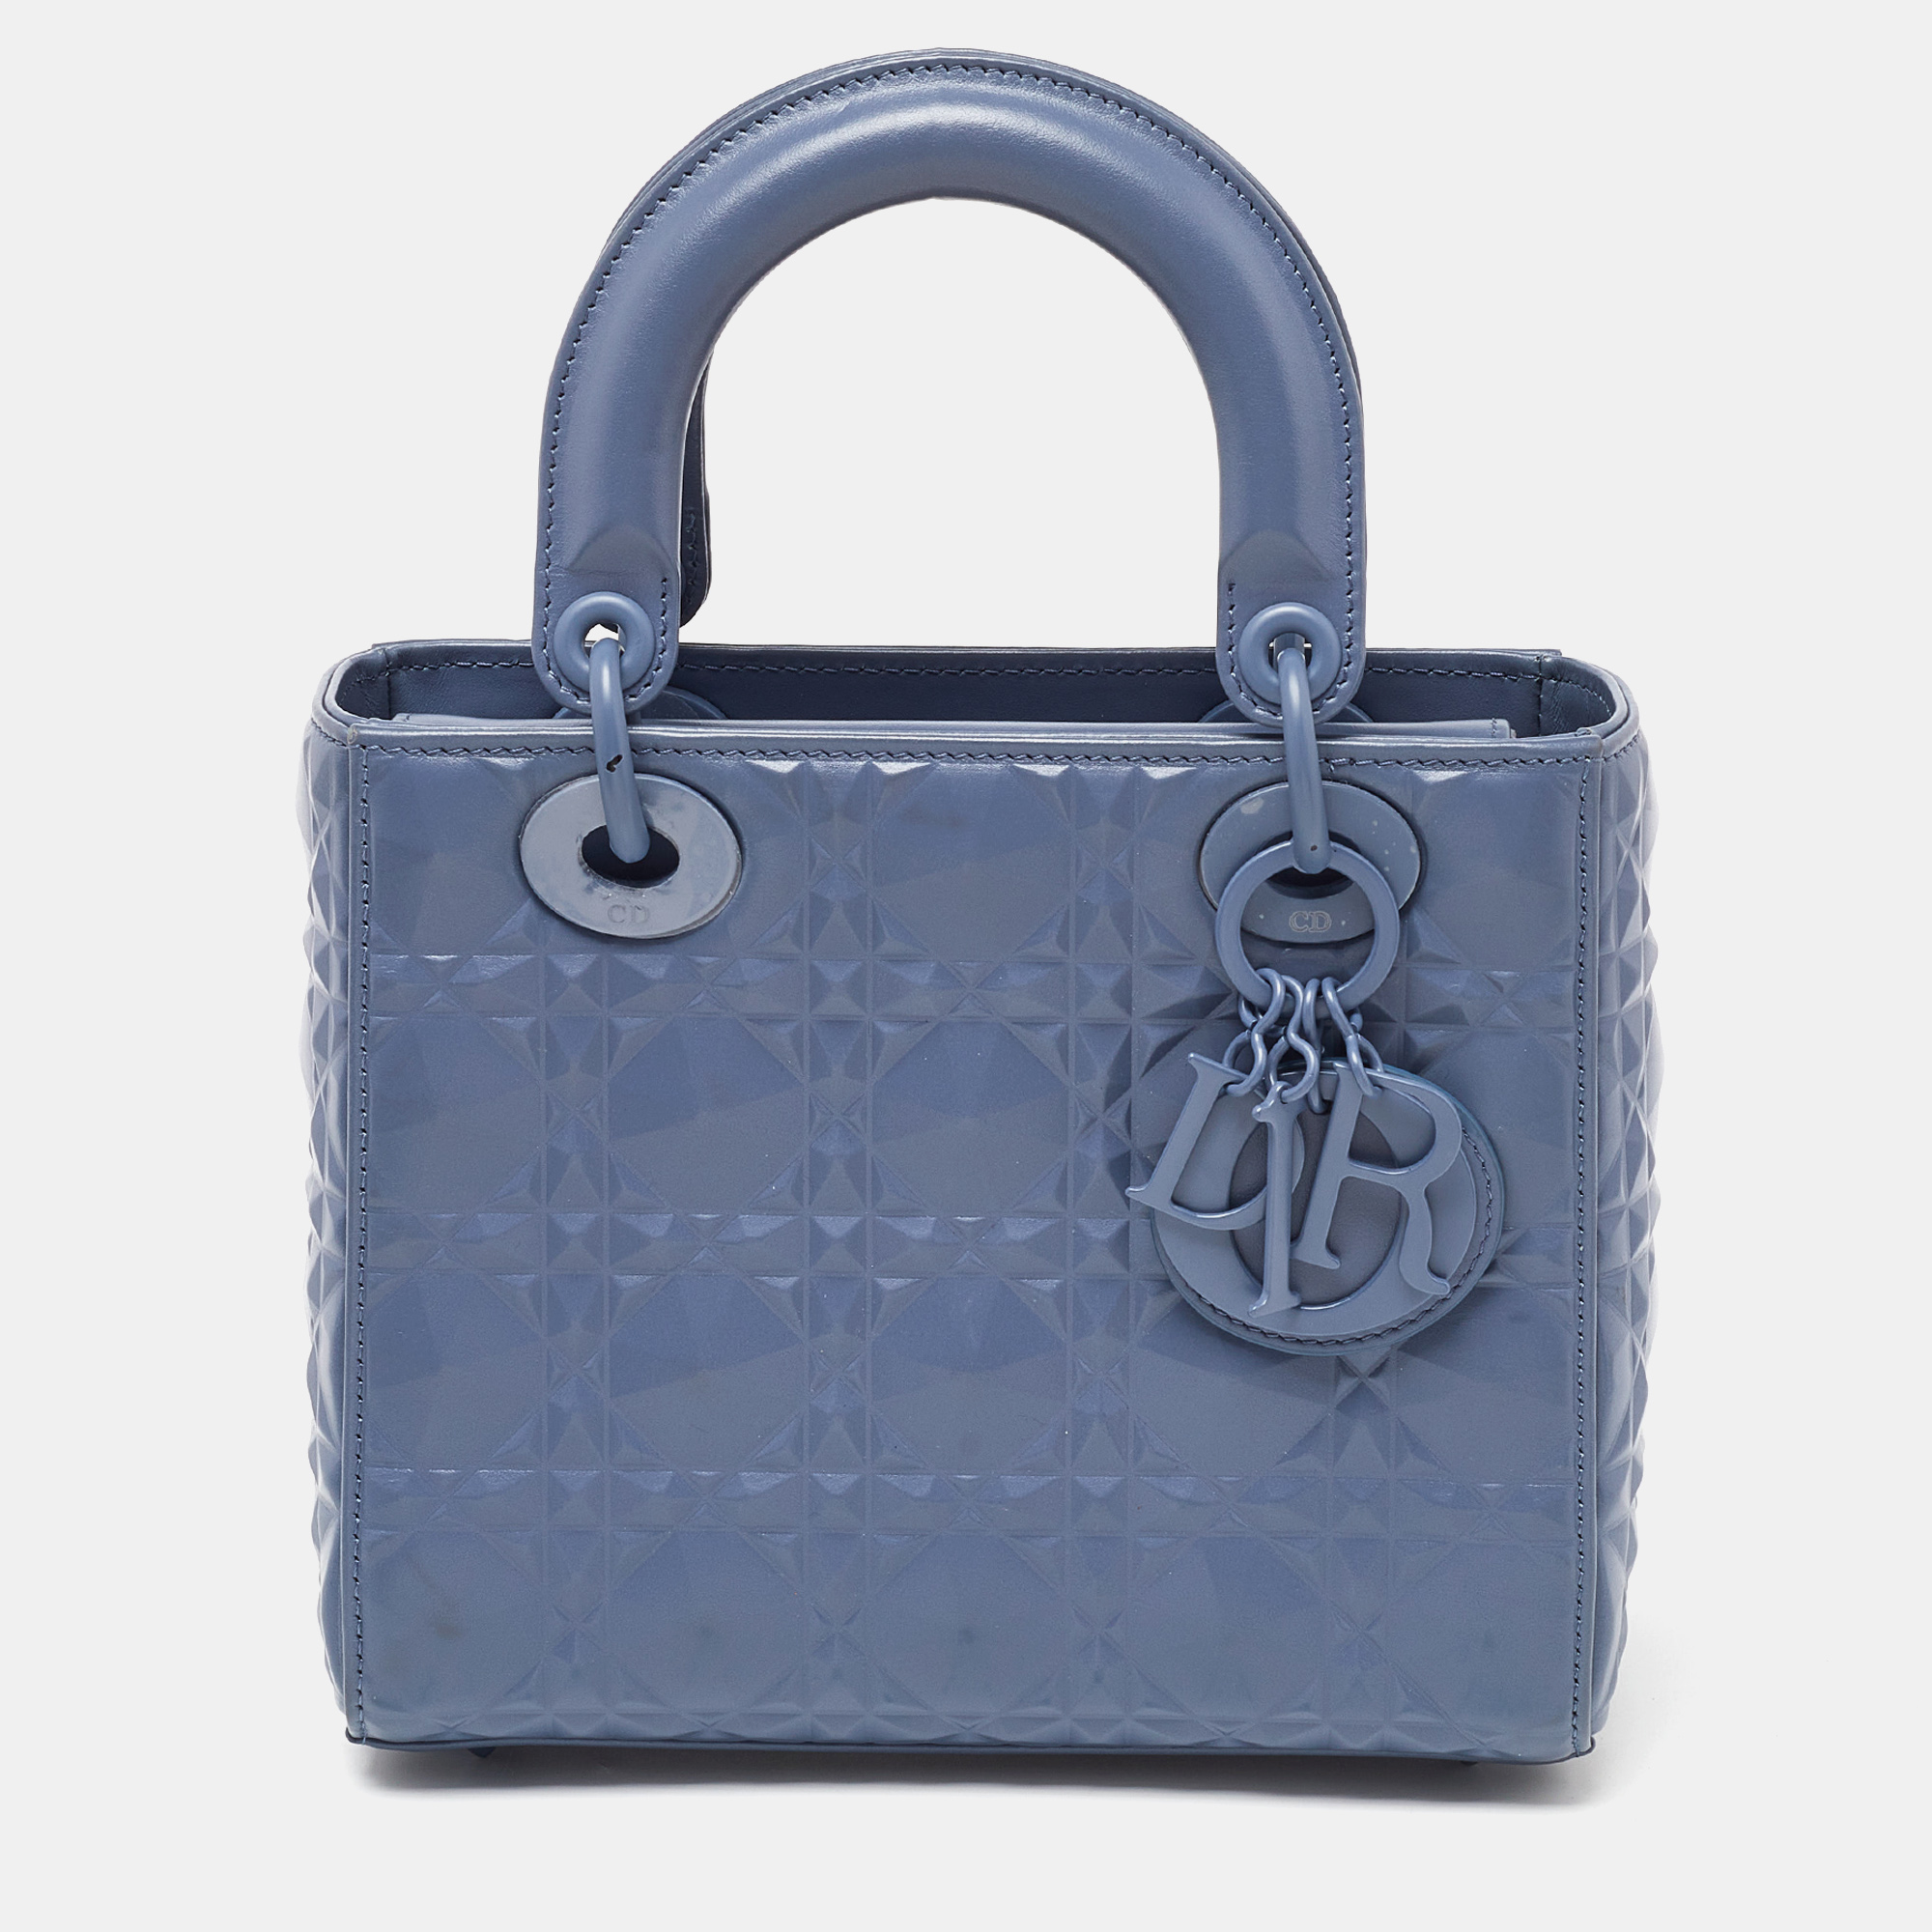 Dior blue diamond cannage leather small lady dior tote